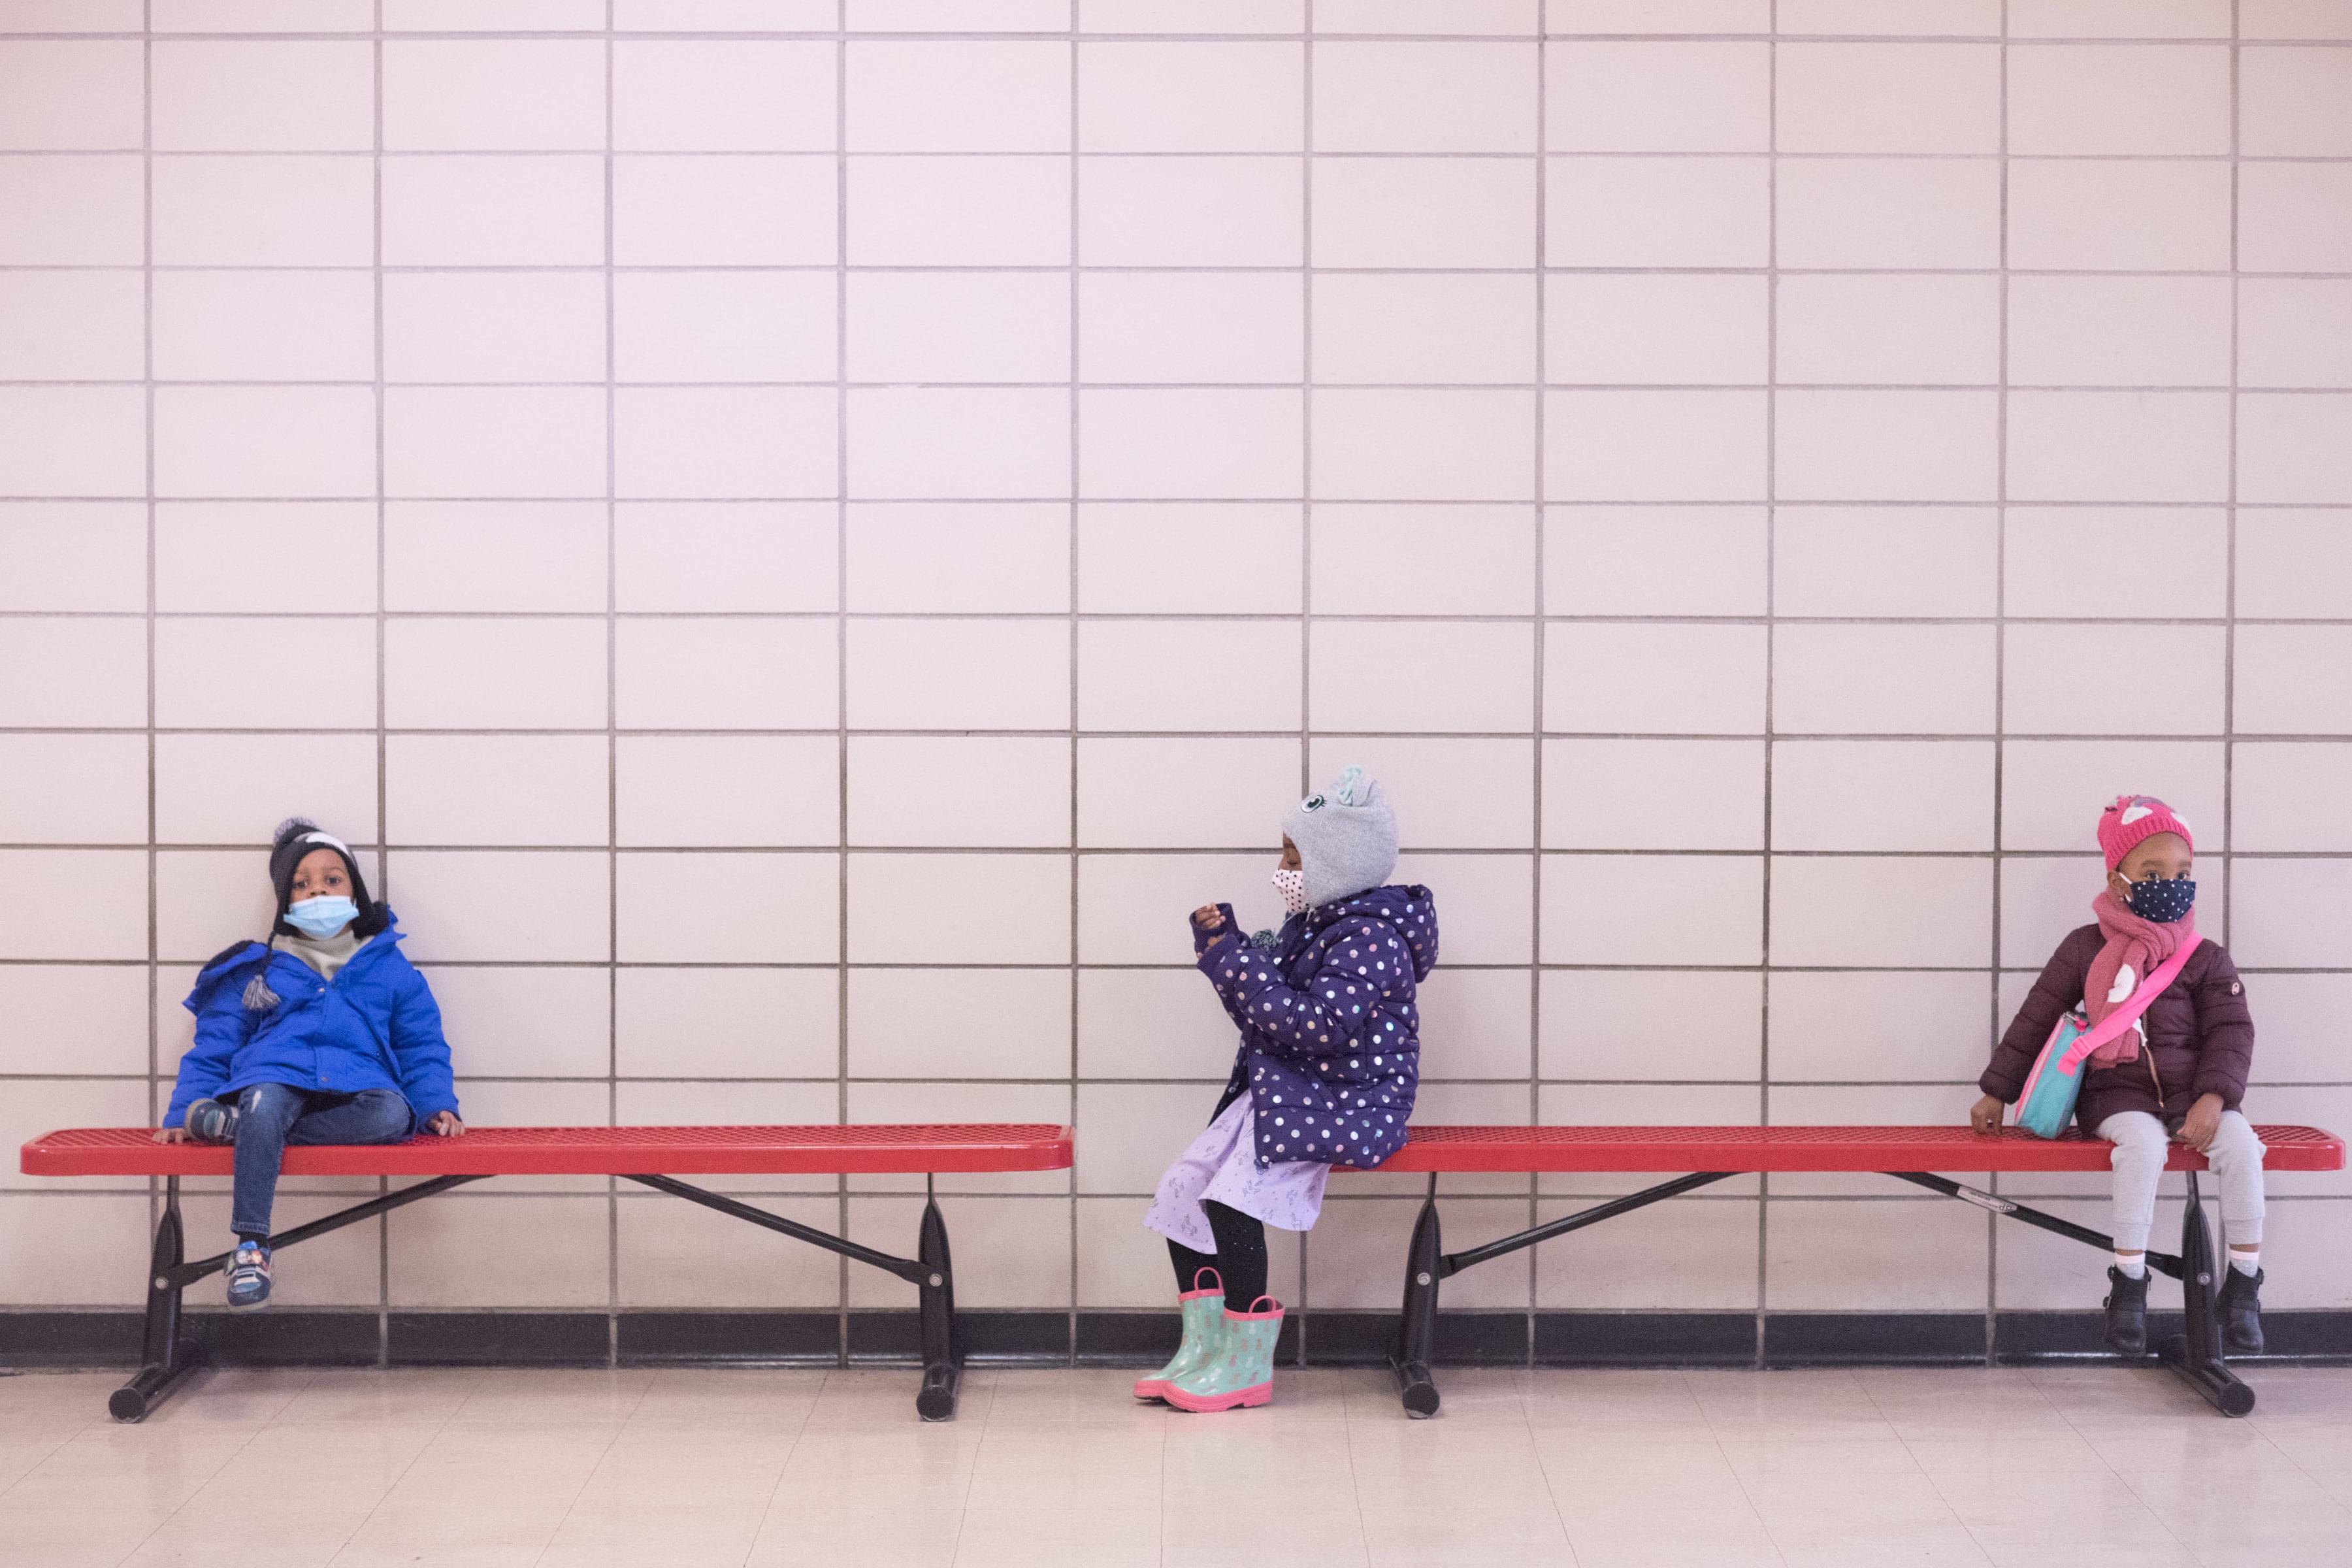 Preschool students sit on benches at Phyl’s Academy in Brooklyn in March 2021. Michael Appleton/Mayoral Photography Office